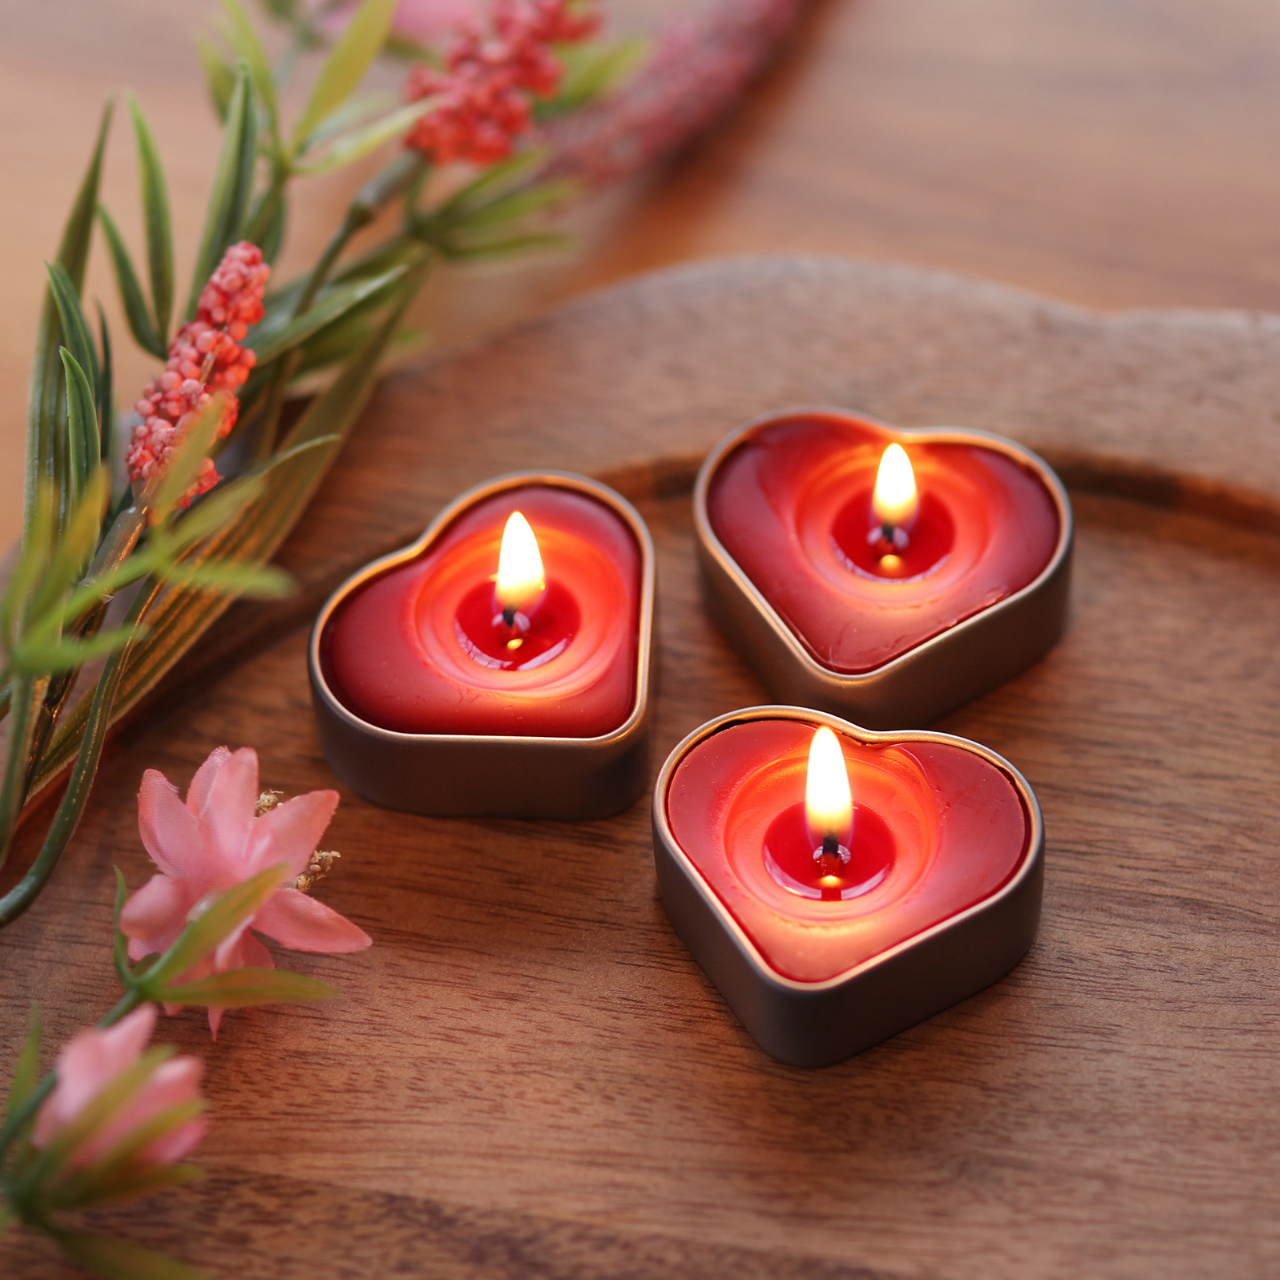 Candle "Red Hot" Beeswax Aromatherapy Heart Tin